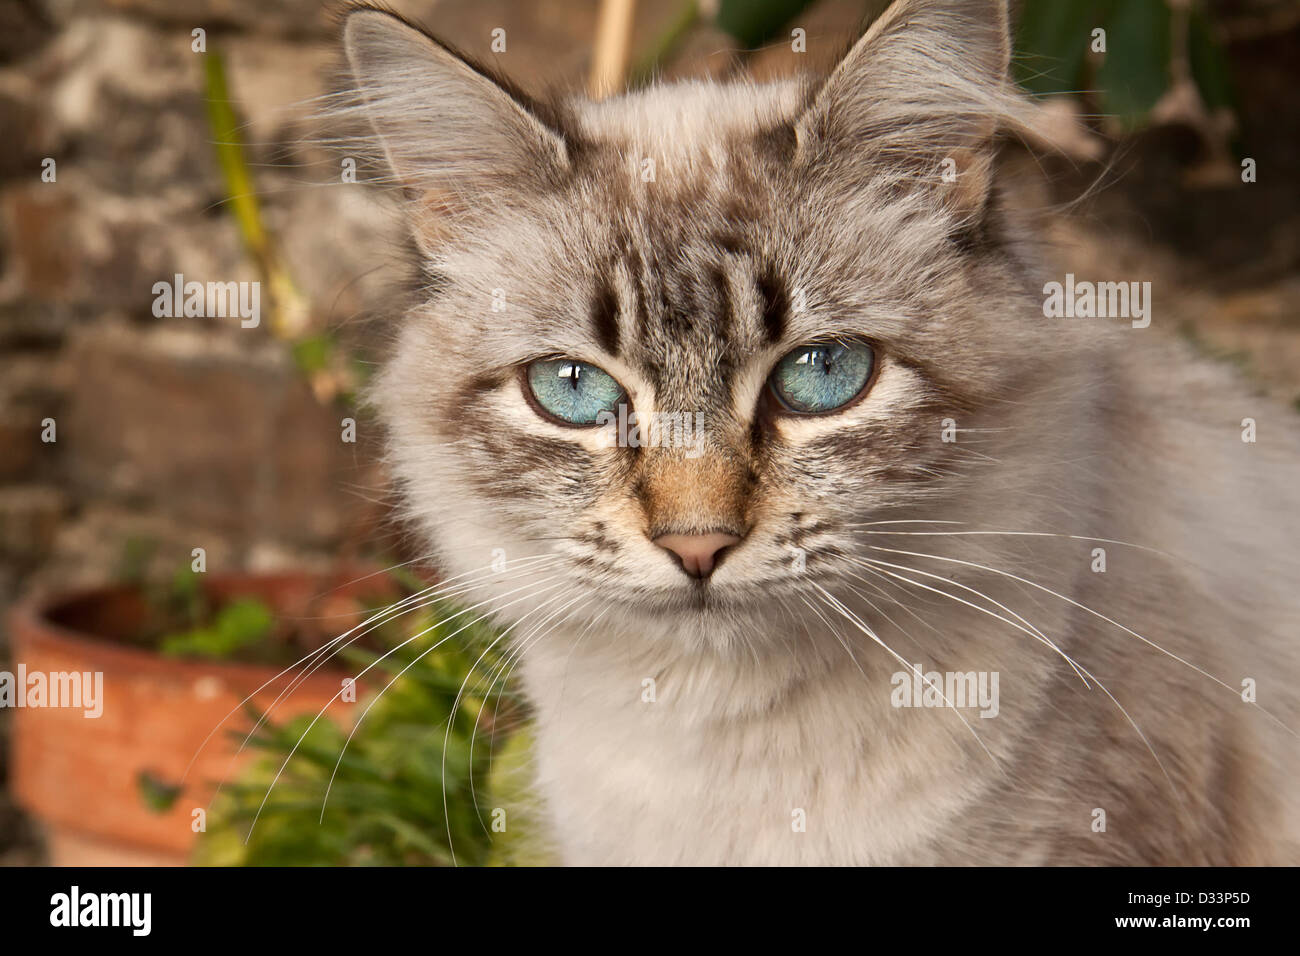 Cat with blue eyes. Stock Photo